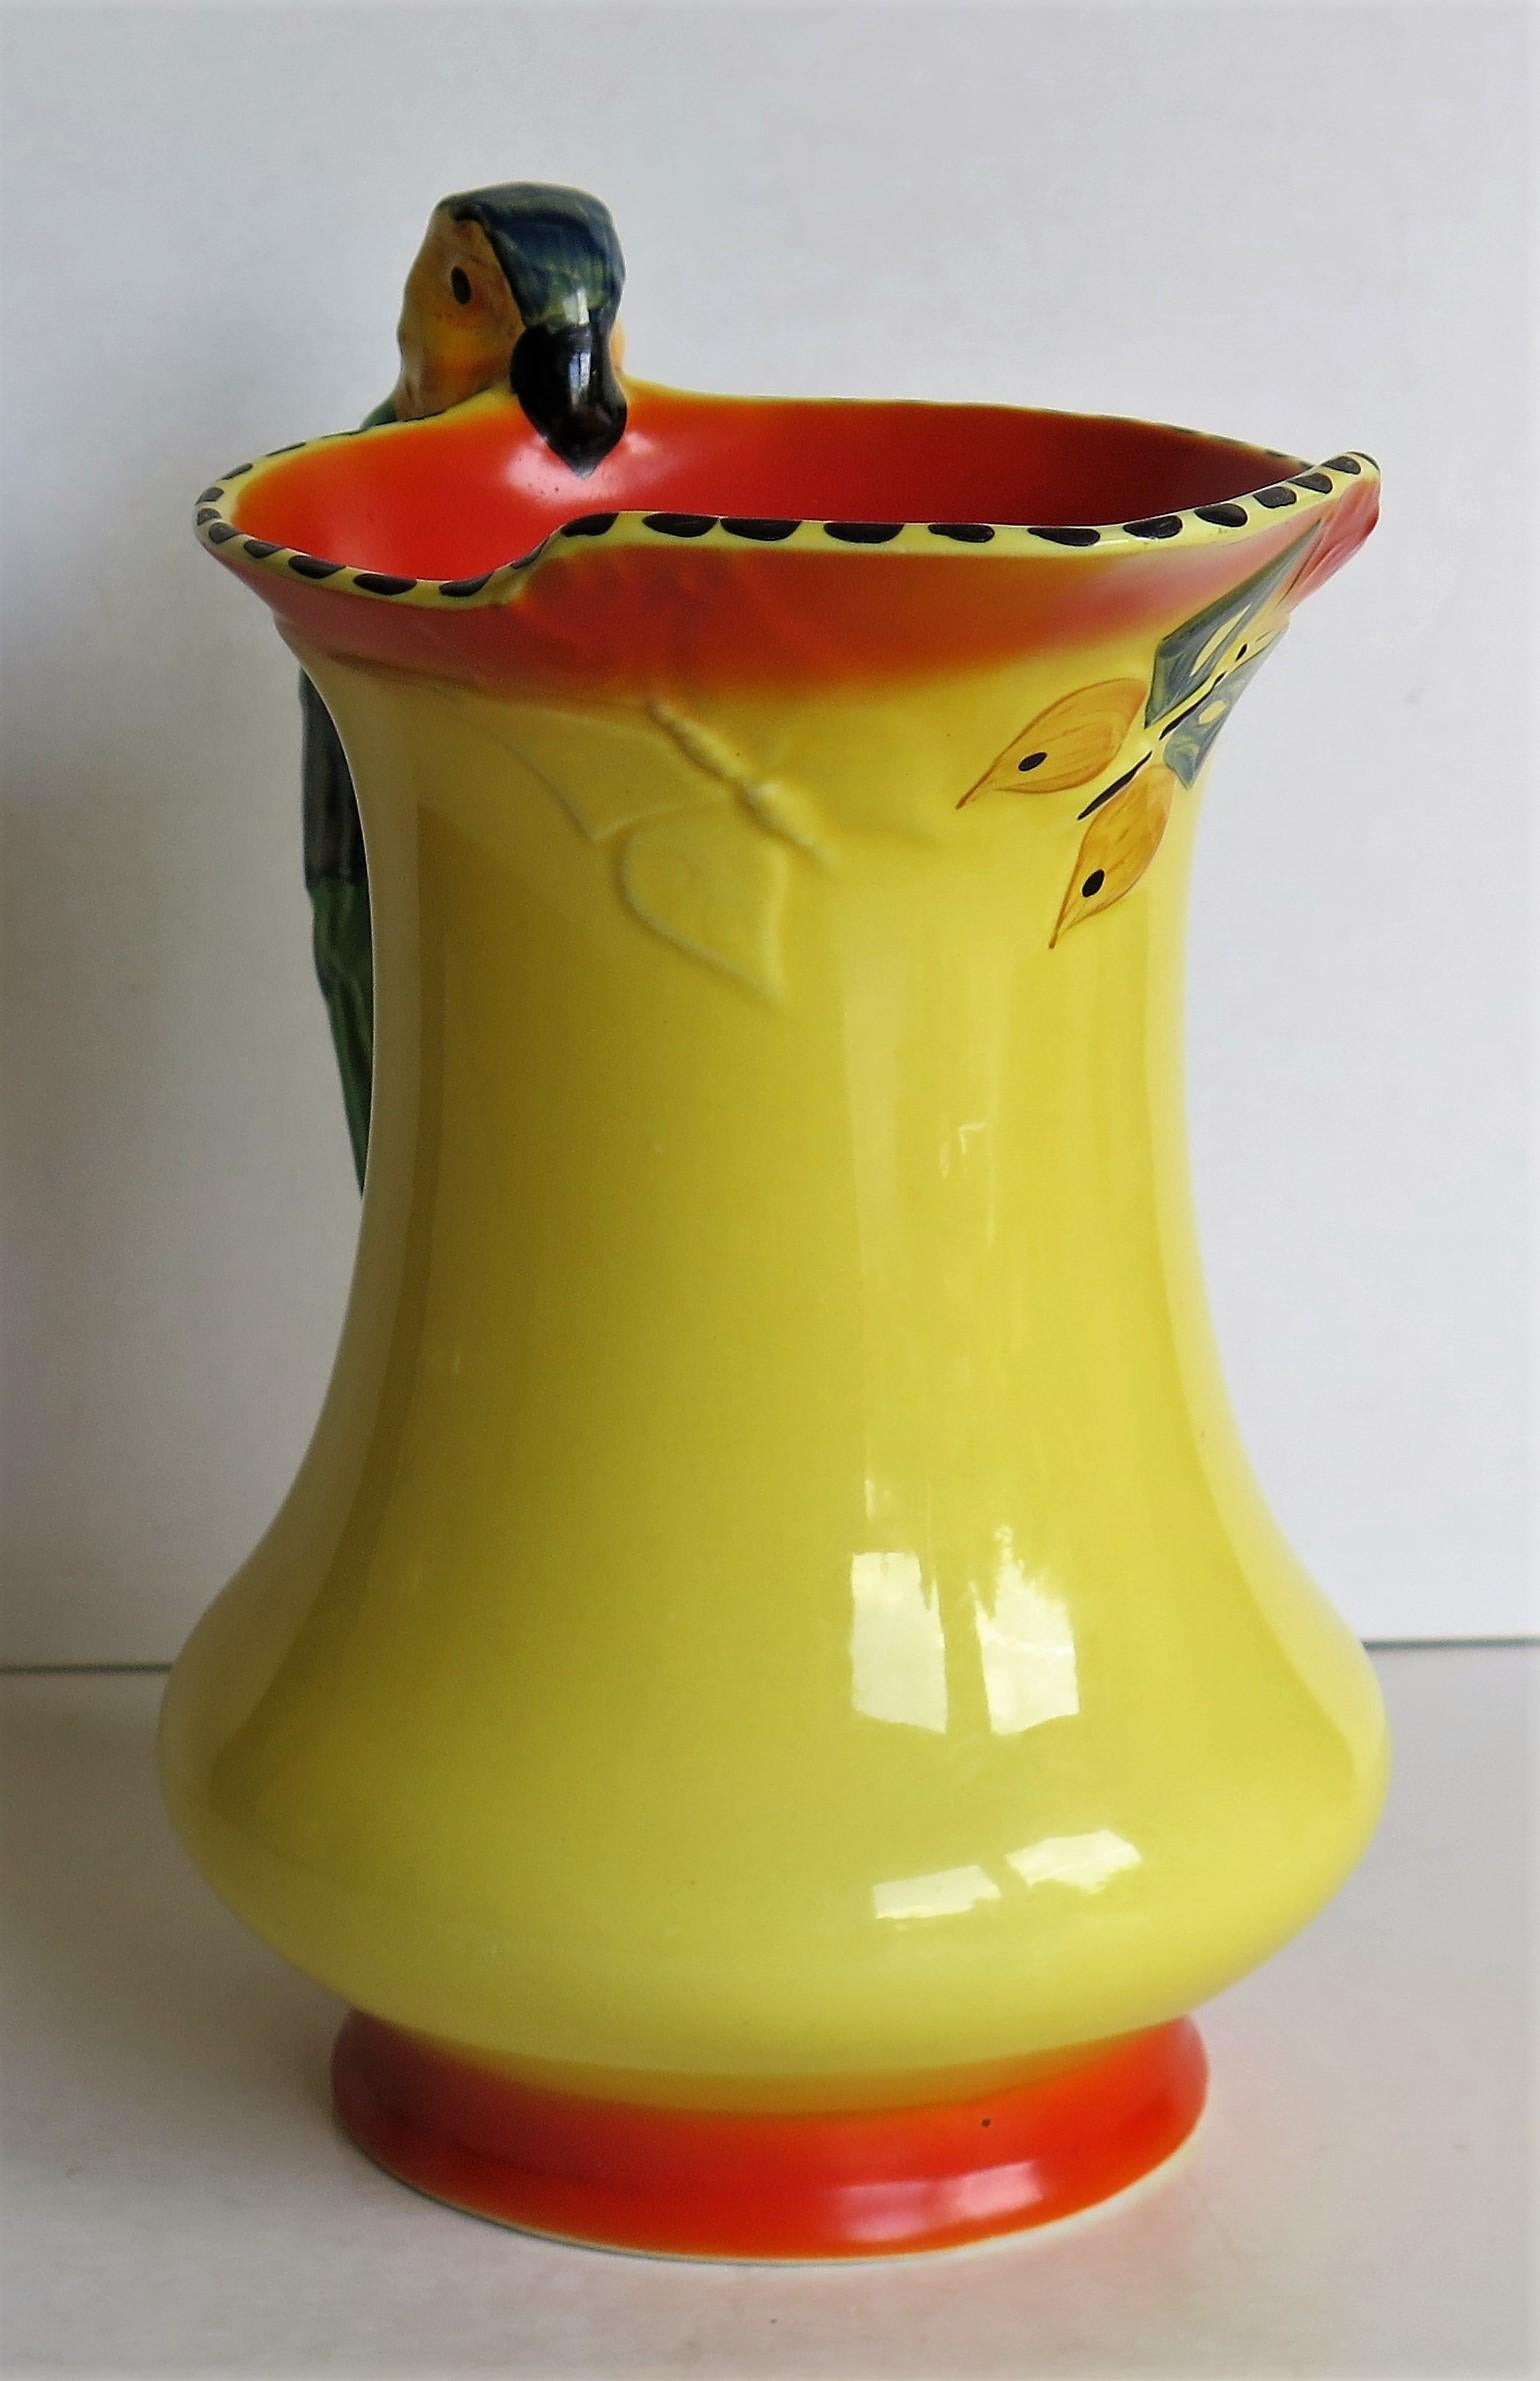 20th Century Art Deco Burleigh Ware Pottery Jug or Pitcher Parrot Handle Hand-Painted, 1930s